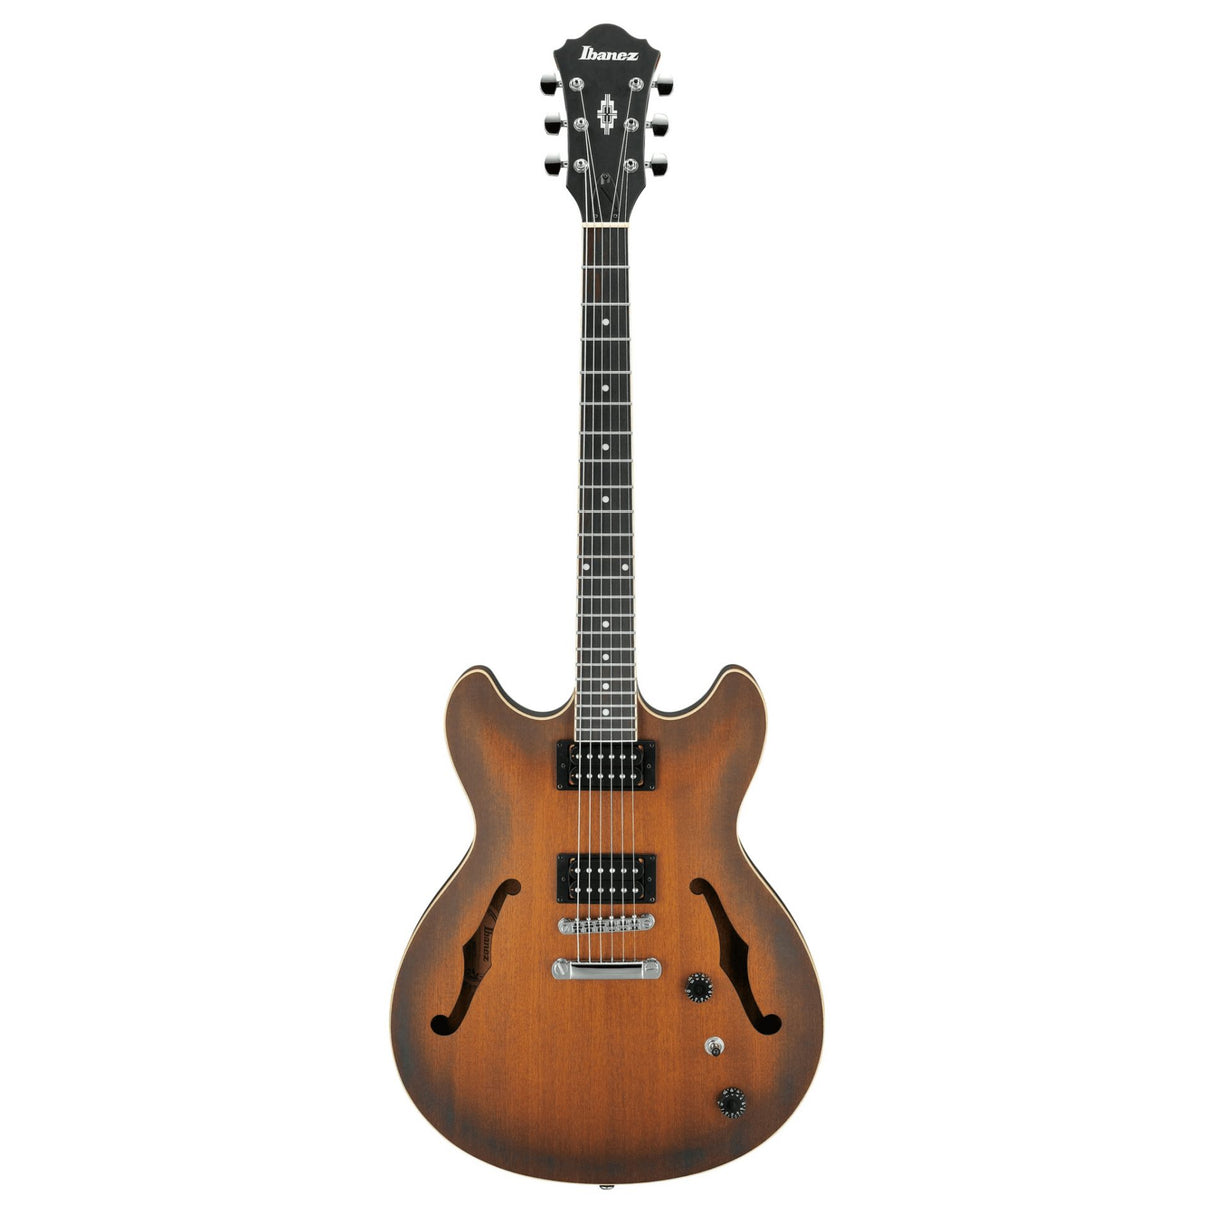 Ibanez AS53-TF Artcore hollowbody